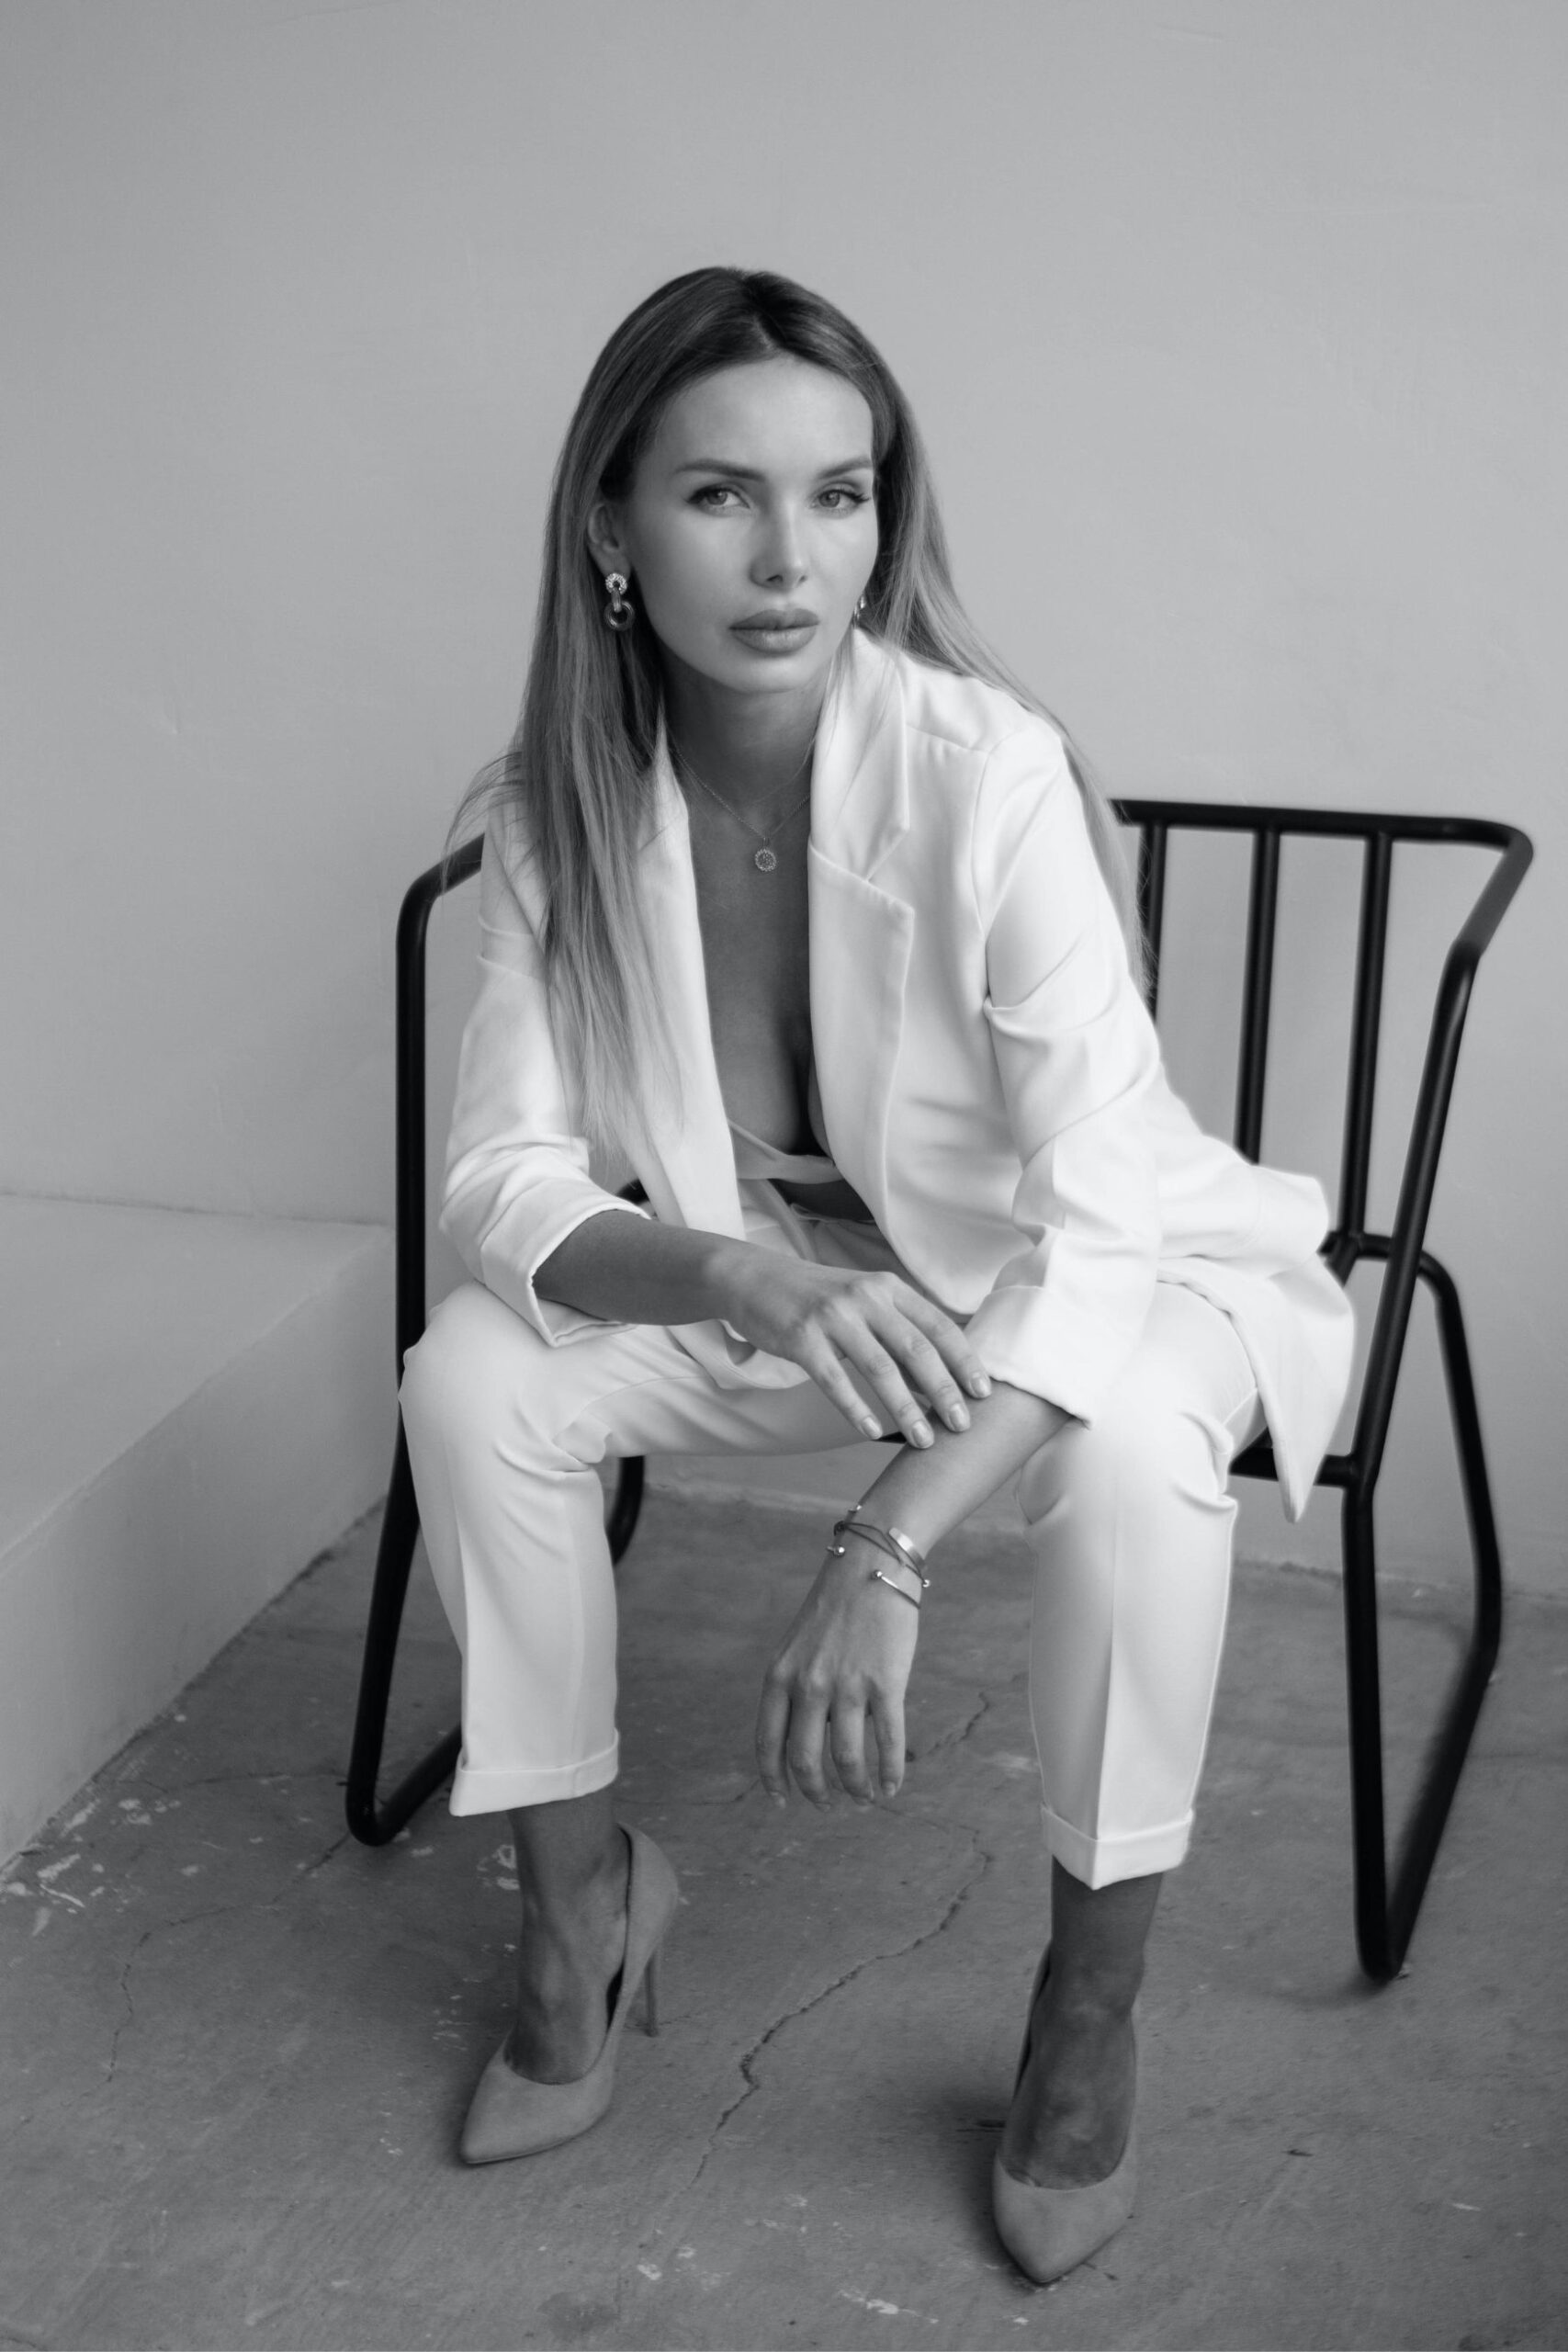 Female Founder sitting in a power pose wearing a white suit and high heels